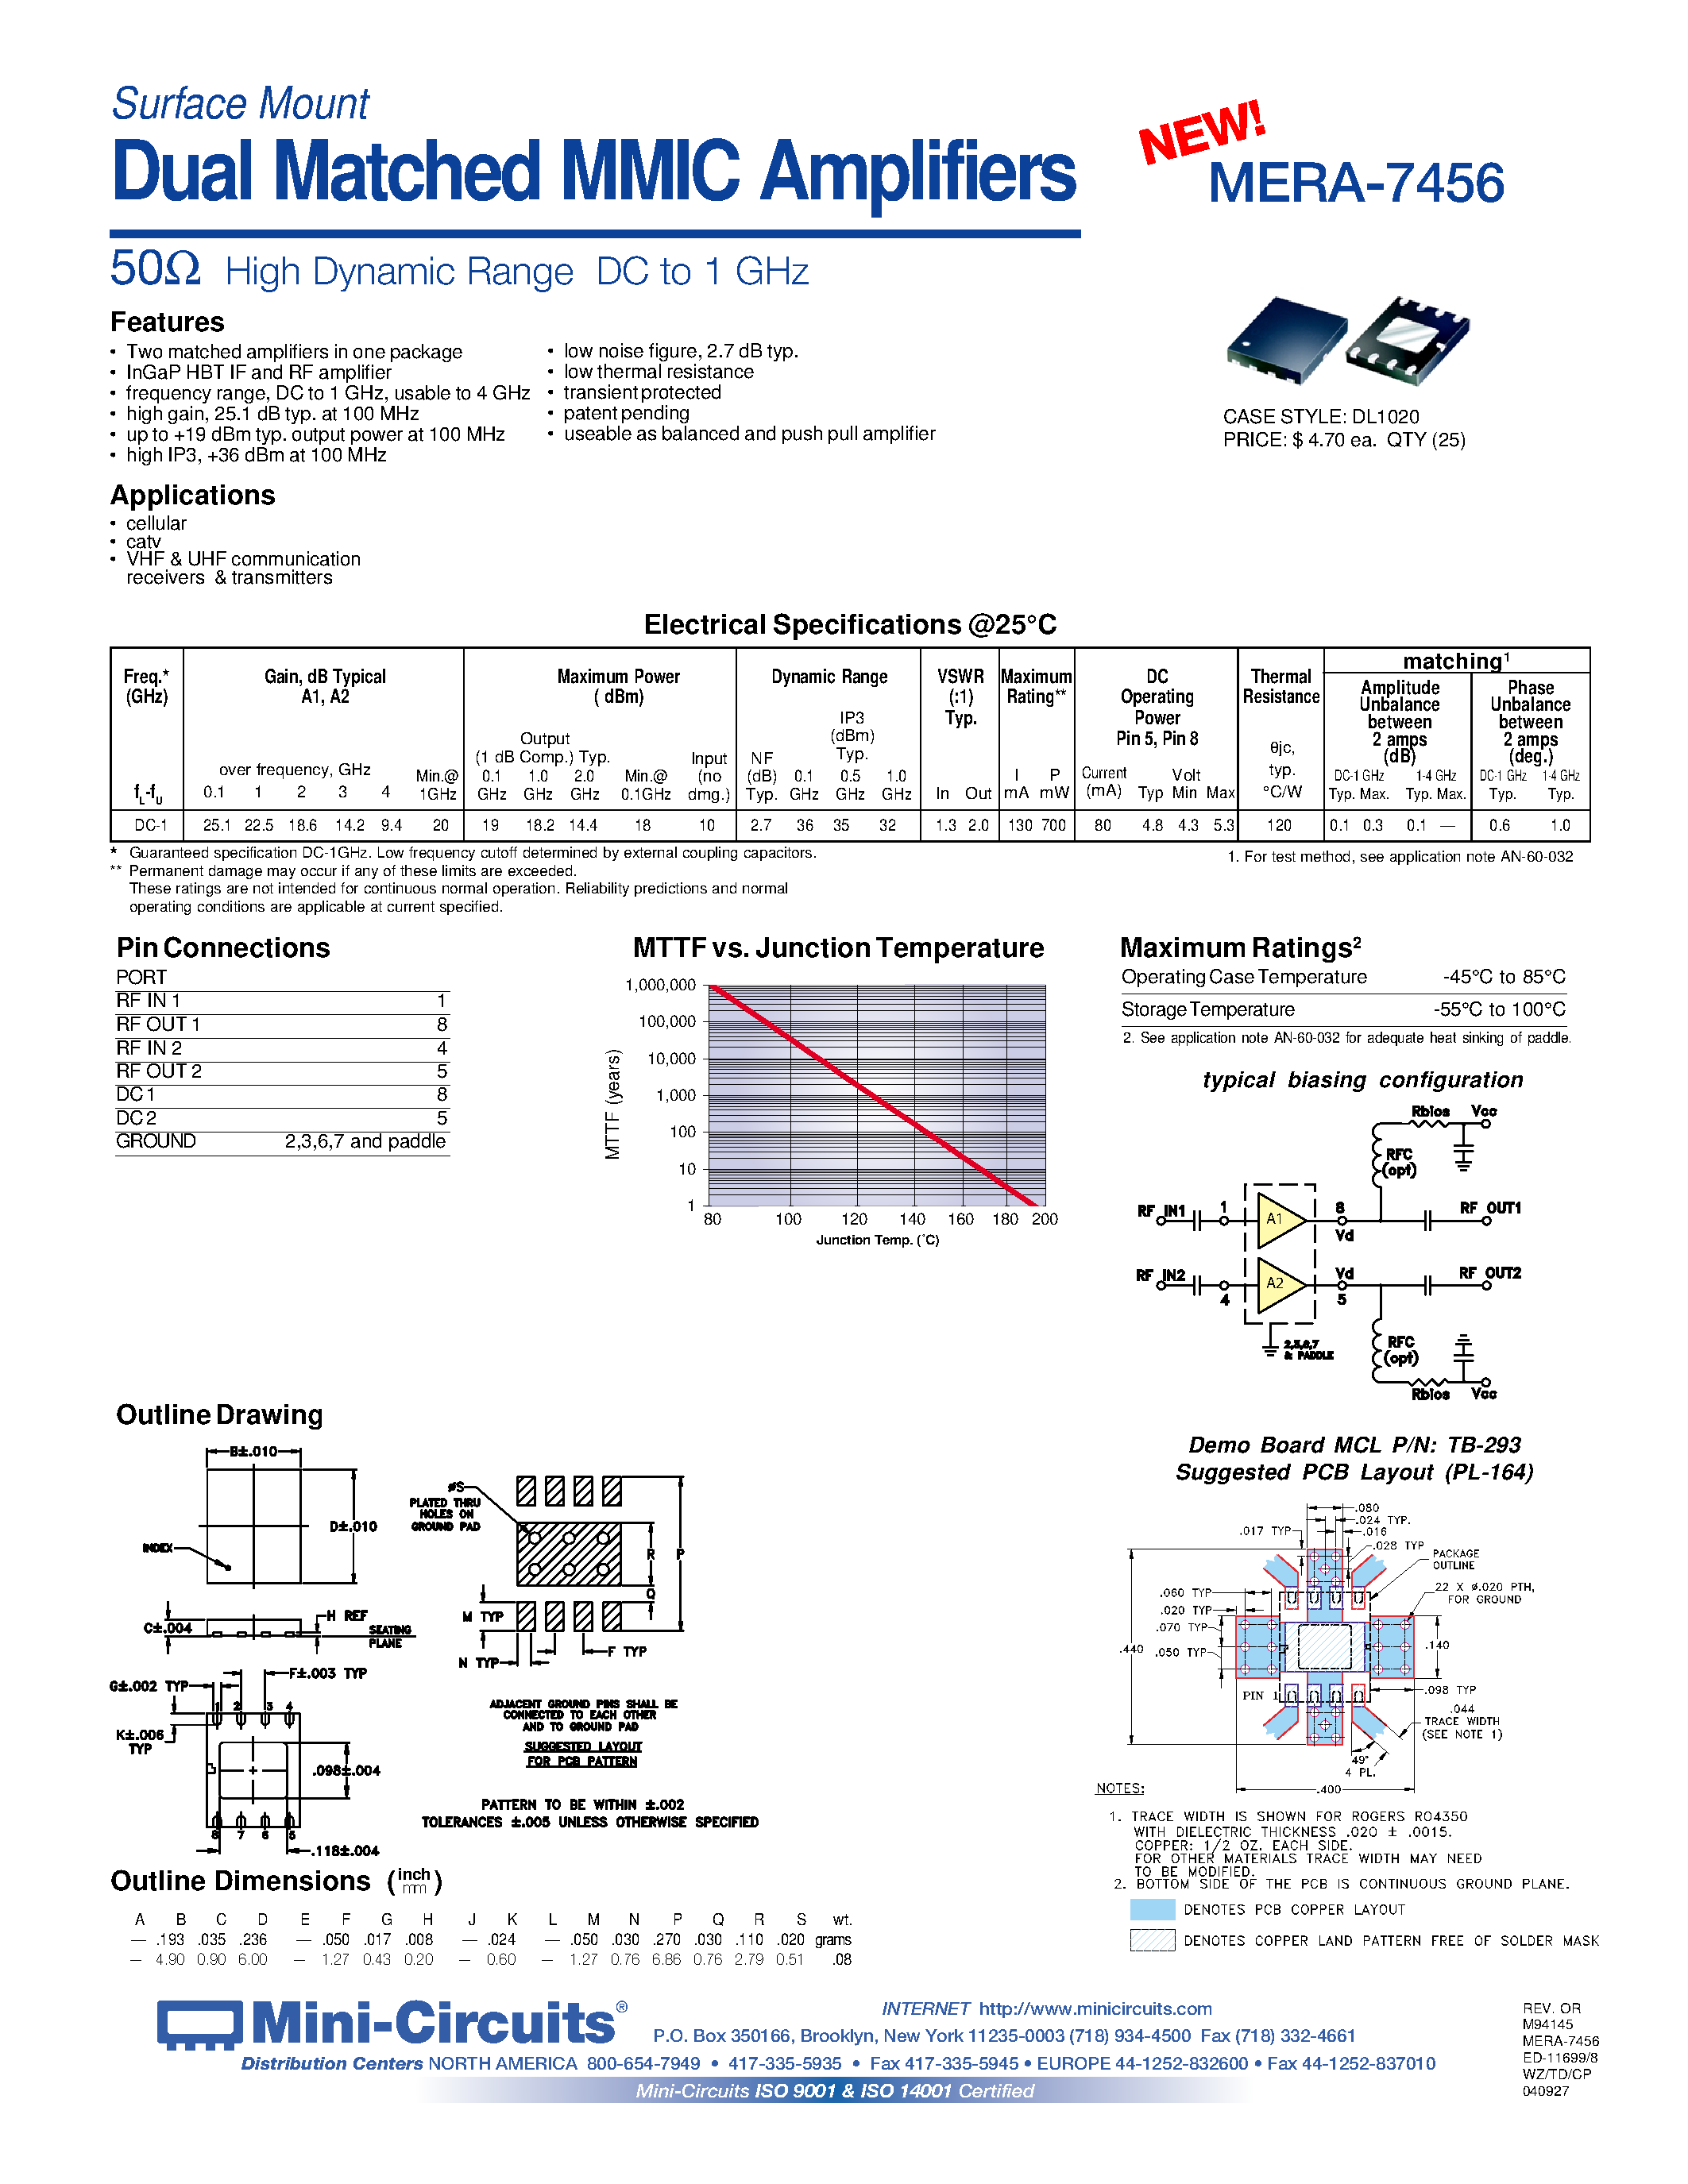 Datasheet MERA-7456 - Surface Mount Dual Matched MMIC Amplifiers 50 High Dynamic Range DC to 1 GHz page 1